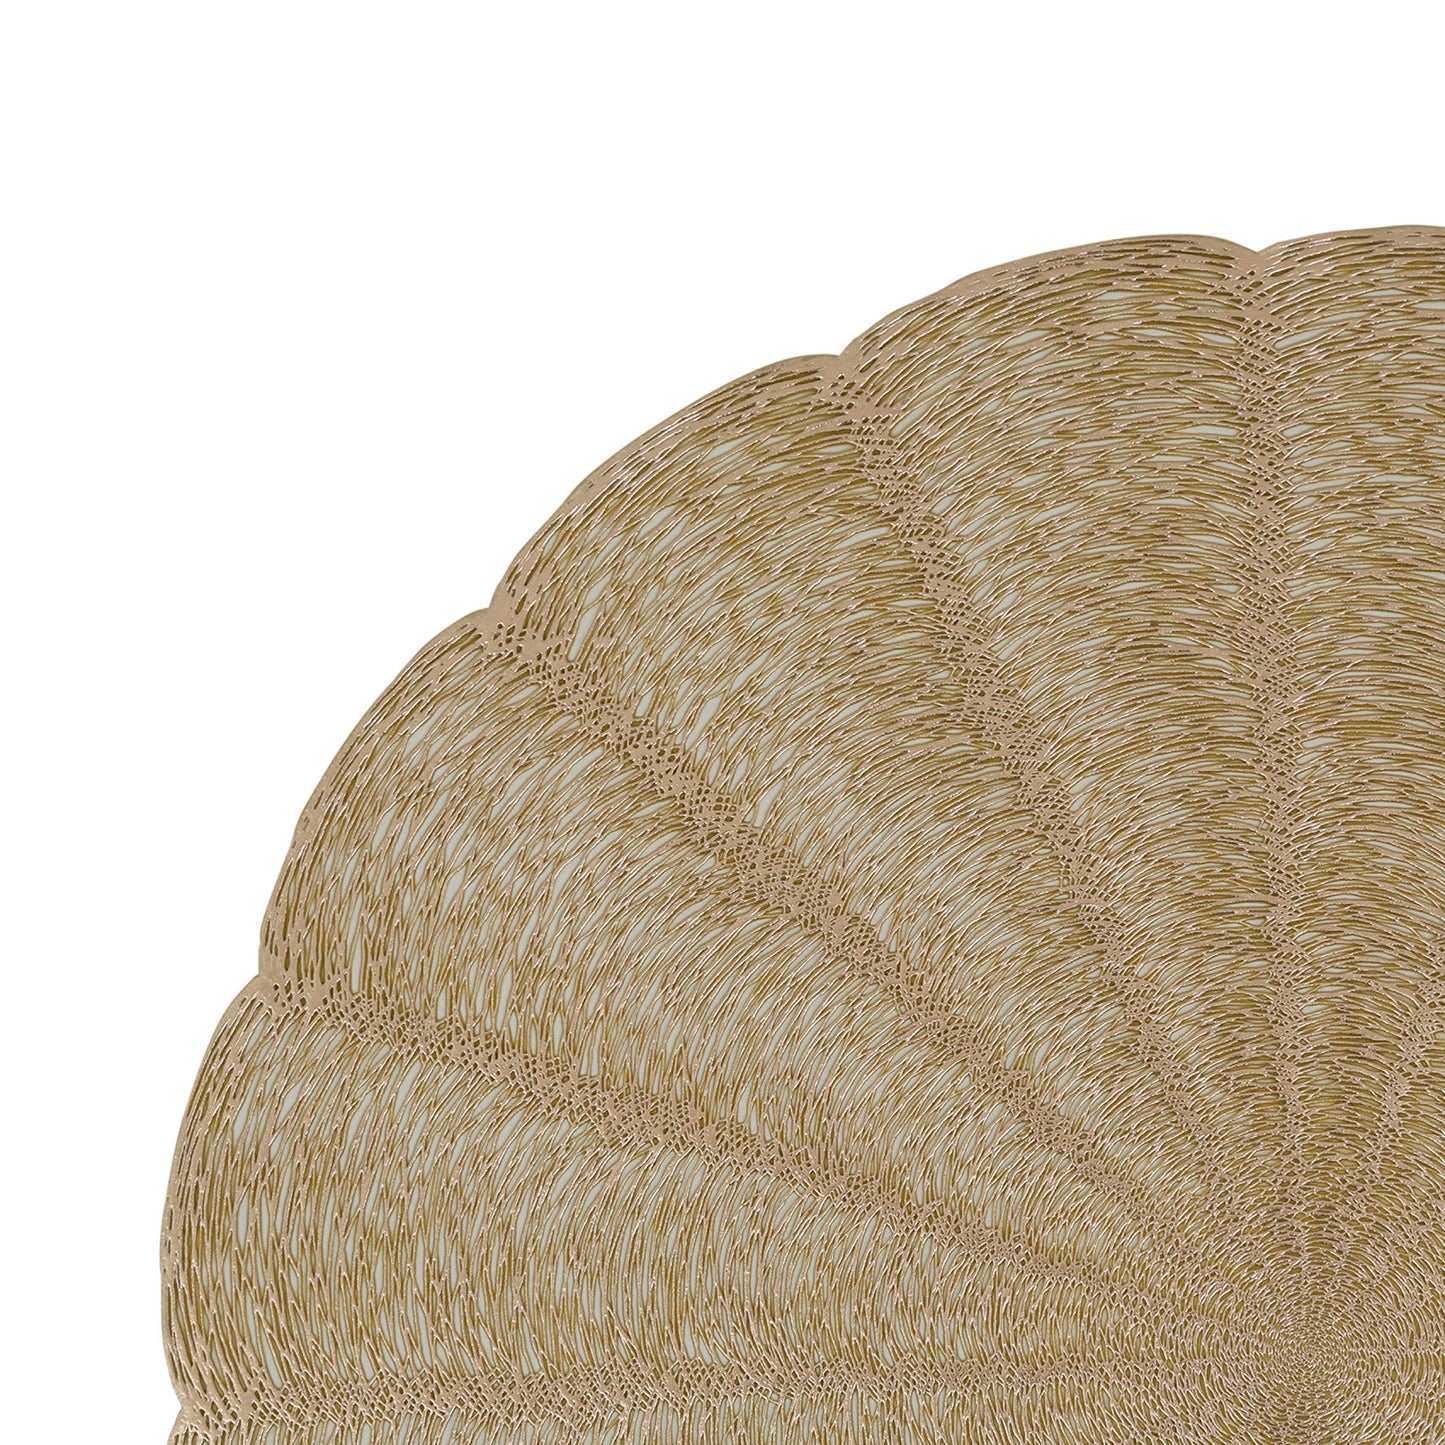 Round scalloped gold placemat